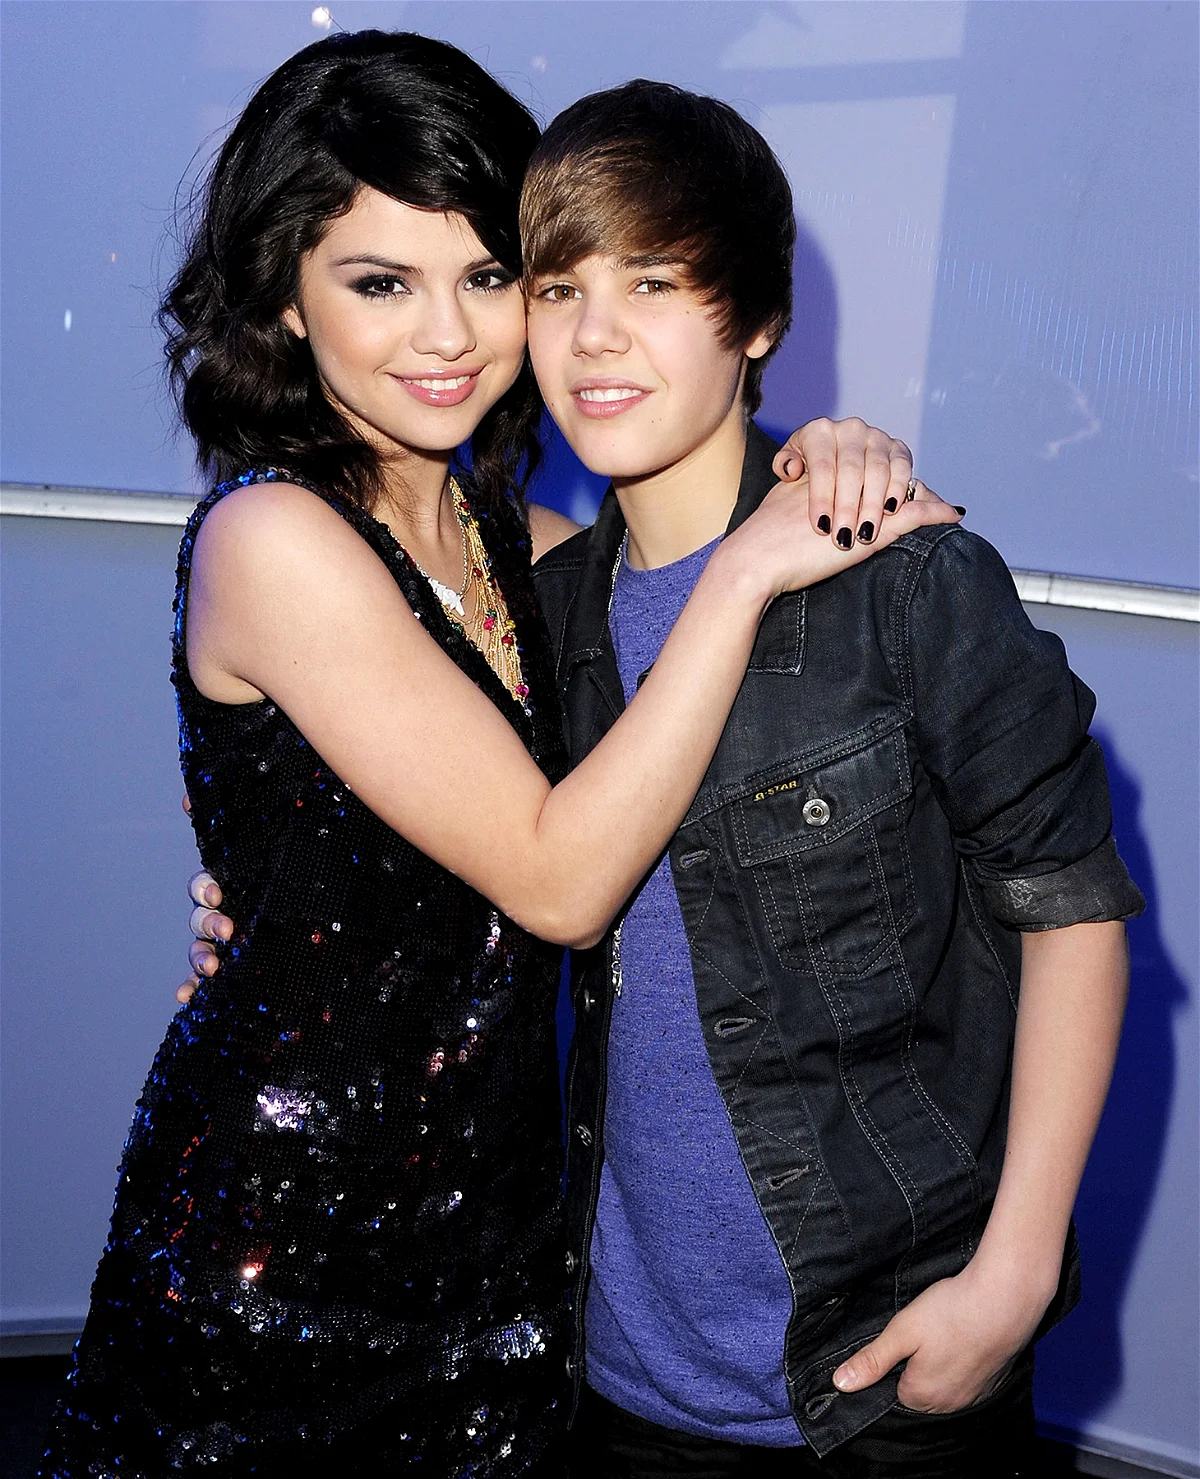 Selena Gomez And Justin Bieber, Smile, Hand, Hairstyle, Shoulder, Flash photography, Dress, Gesture, Happy